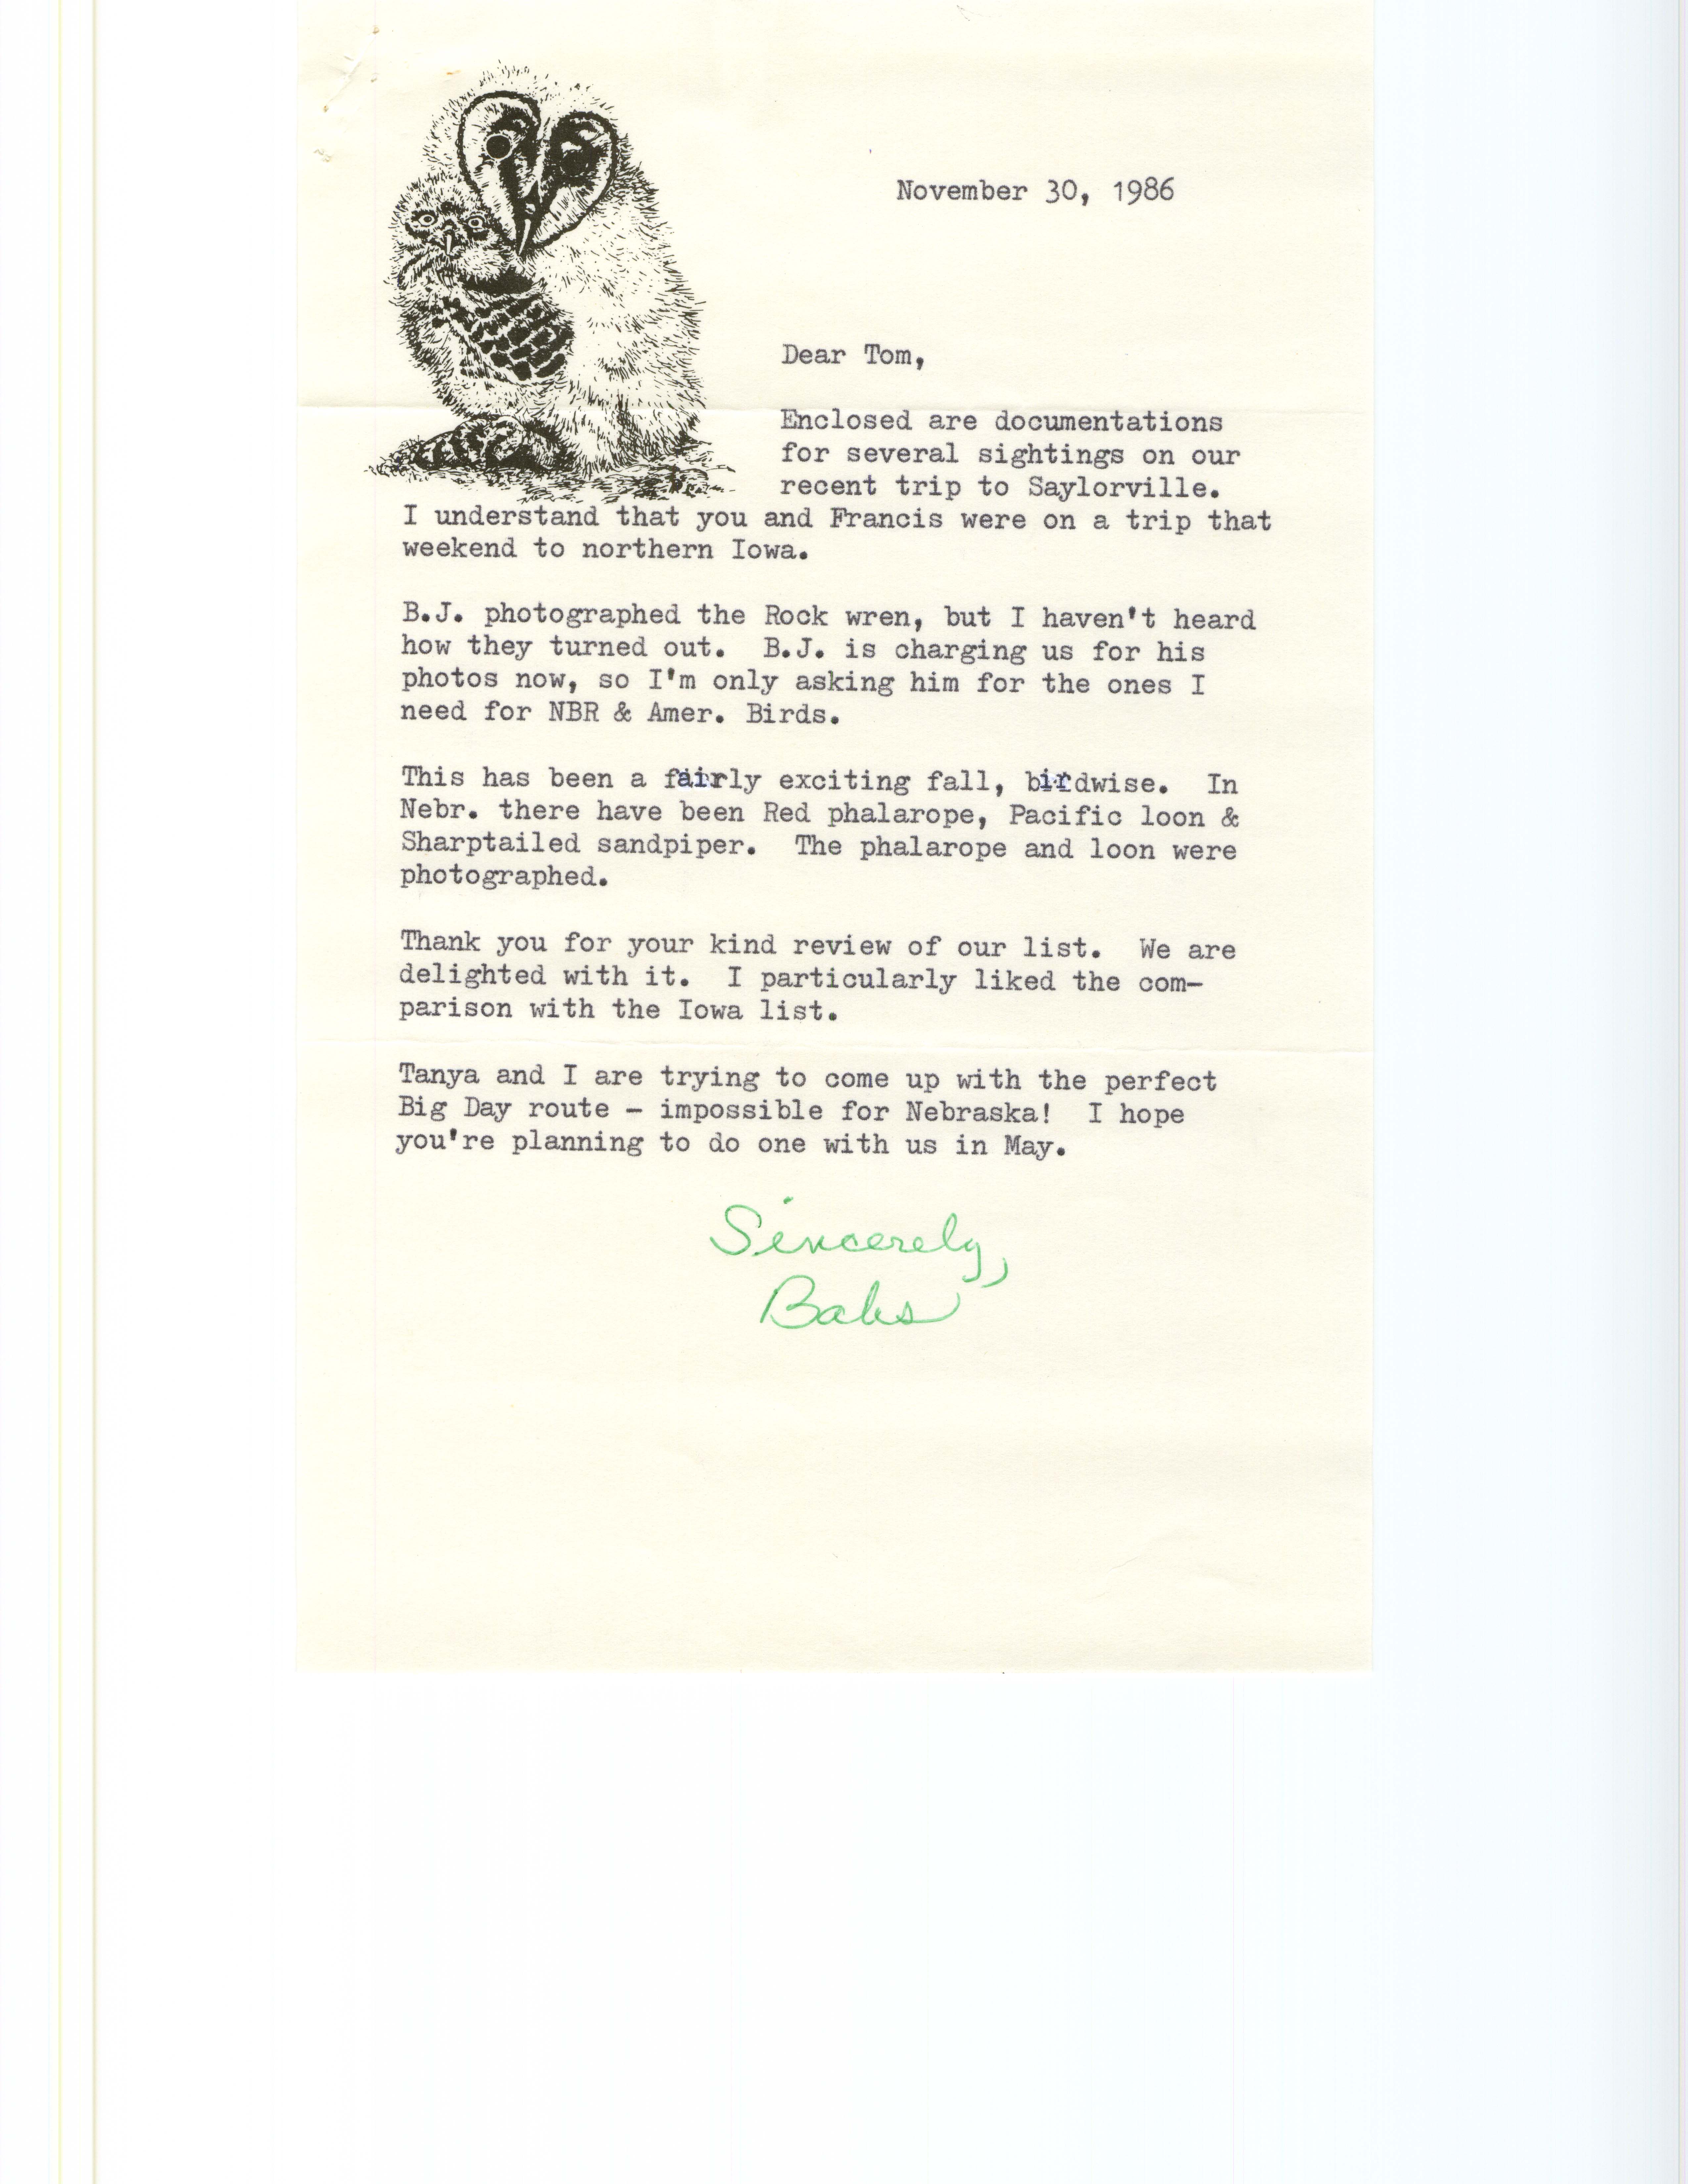 Field notes and Babs Padelford letter to Thomas H. Kent, November 30, 1986